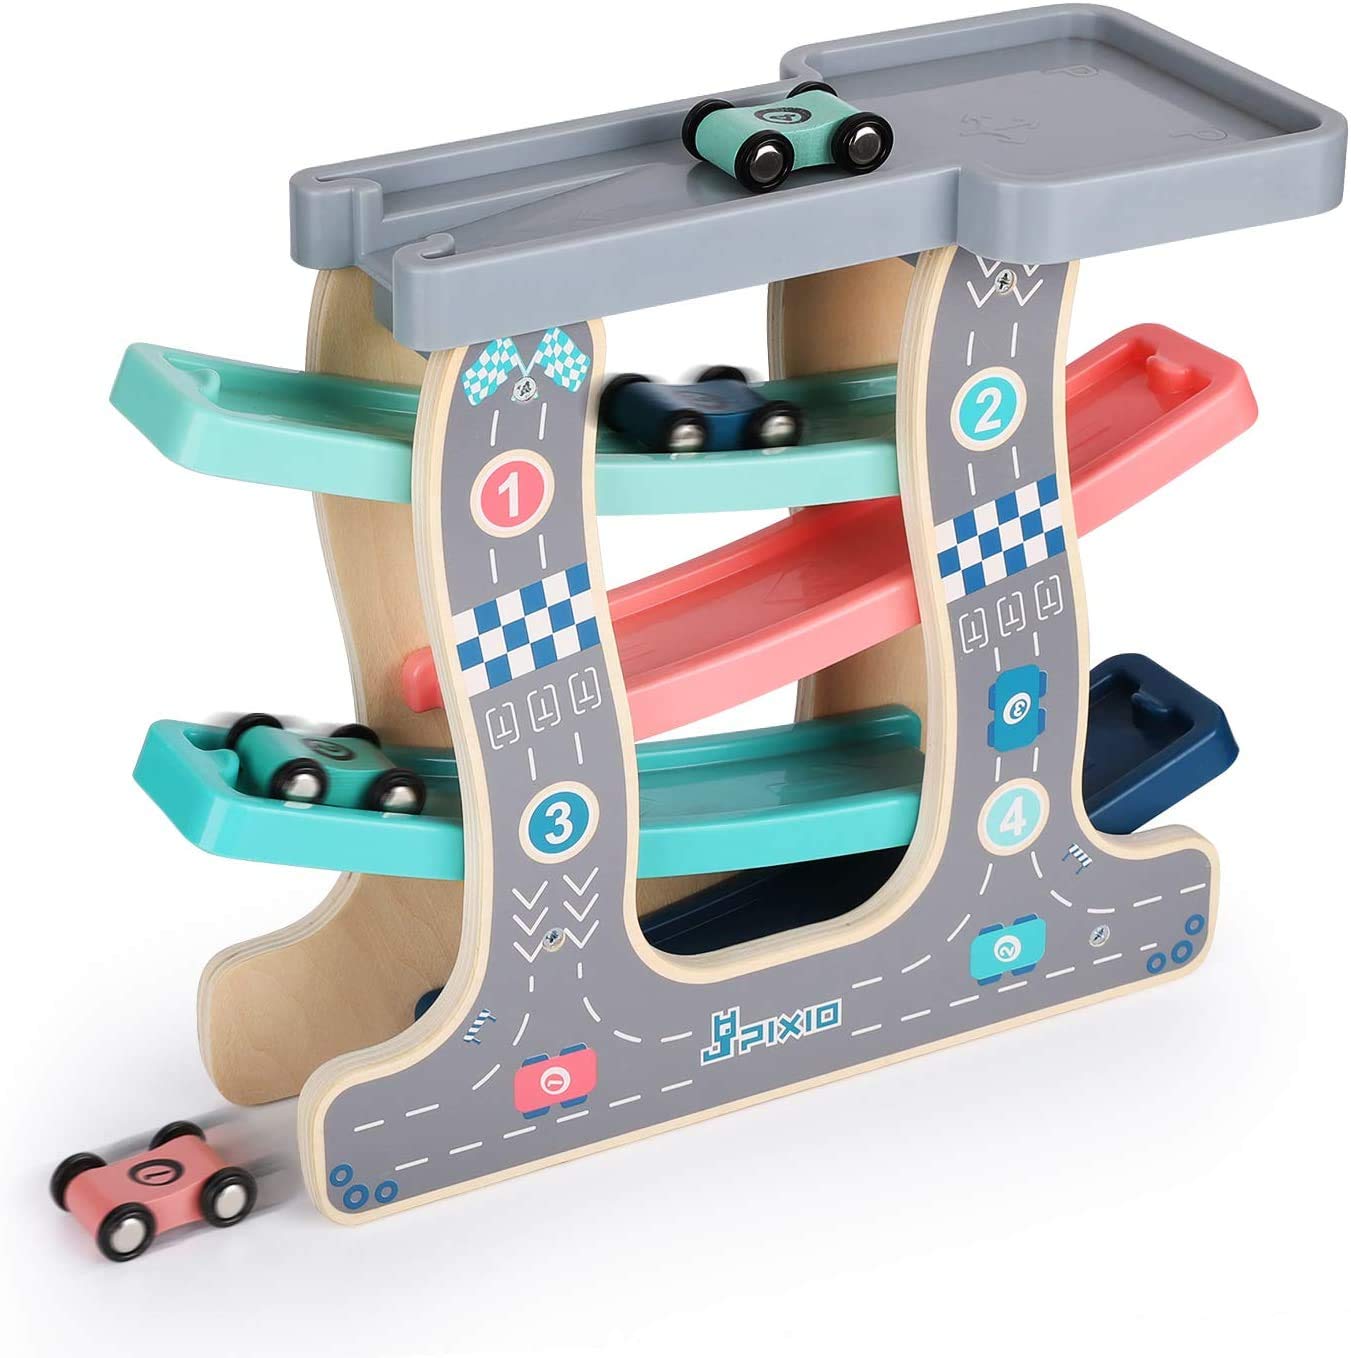 Baybee Wooden Gliding Car for Kids, Baby Toy Car Games, Kids Toys Set with 4 Race Track and Parking Slot